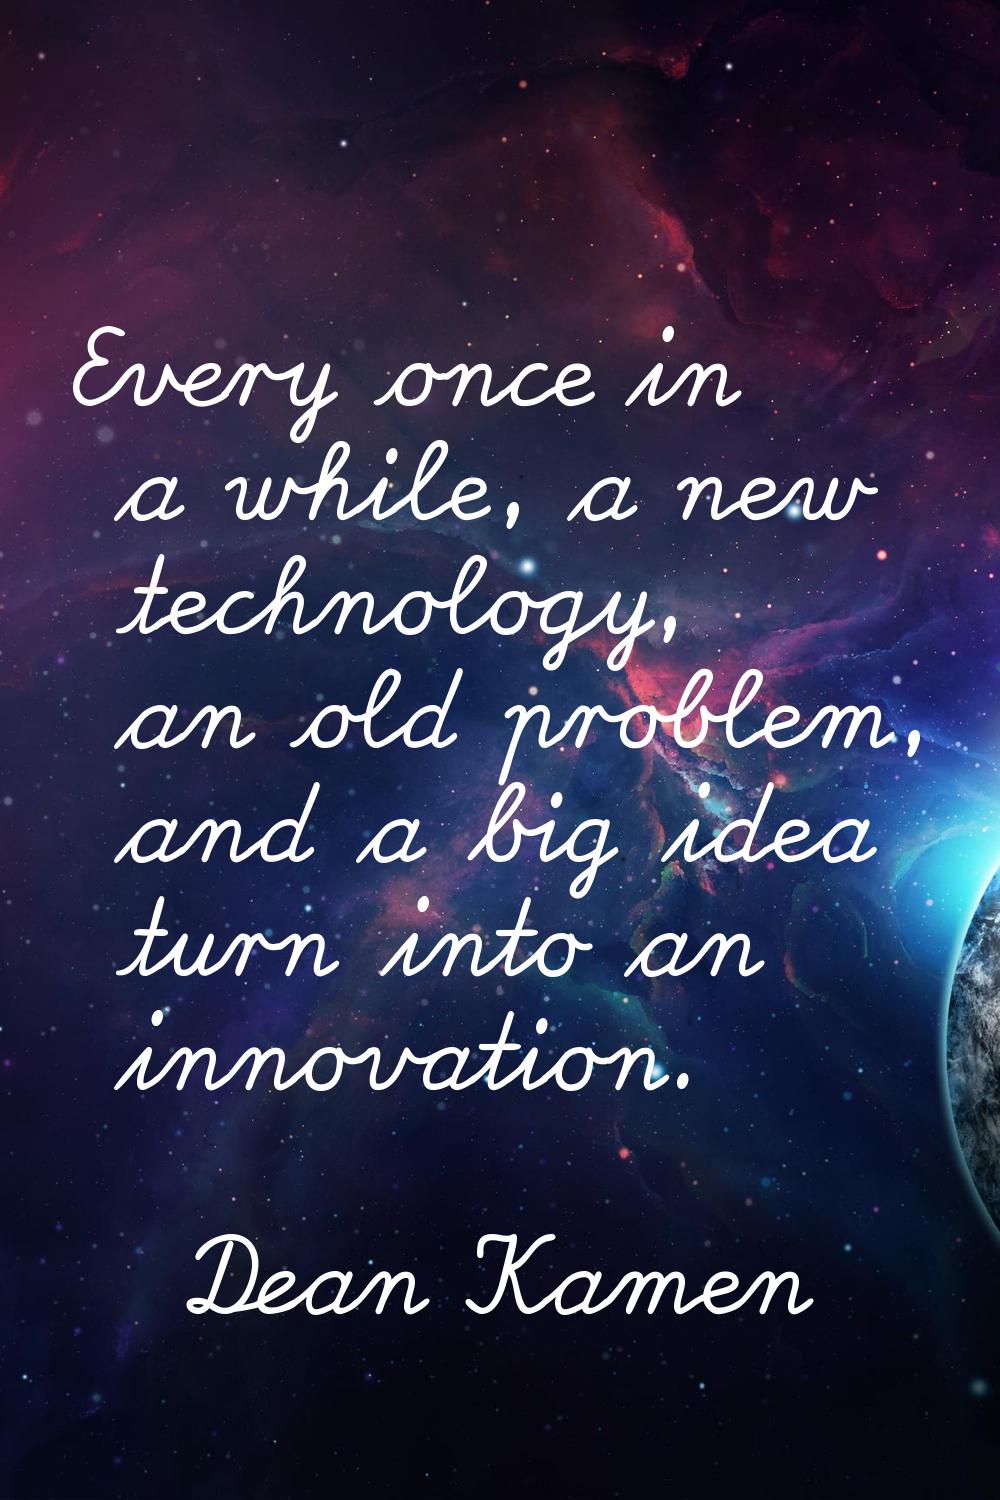 Every once in a while, a new technology, an old problem, and a big idea turn into an innovation.